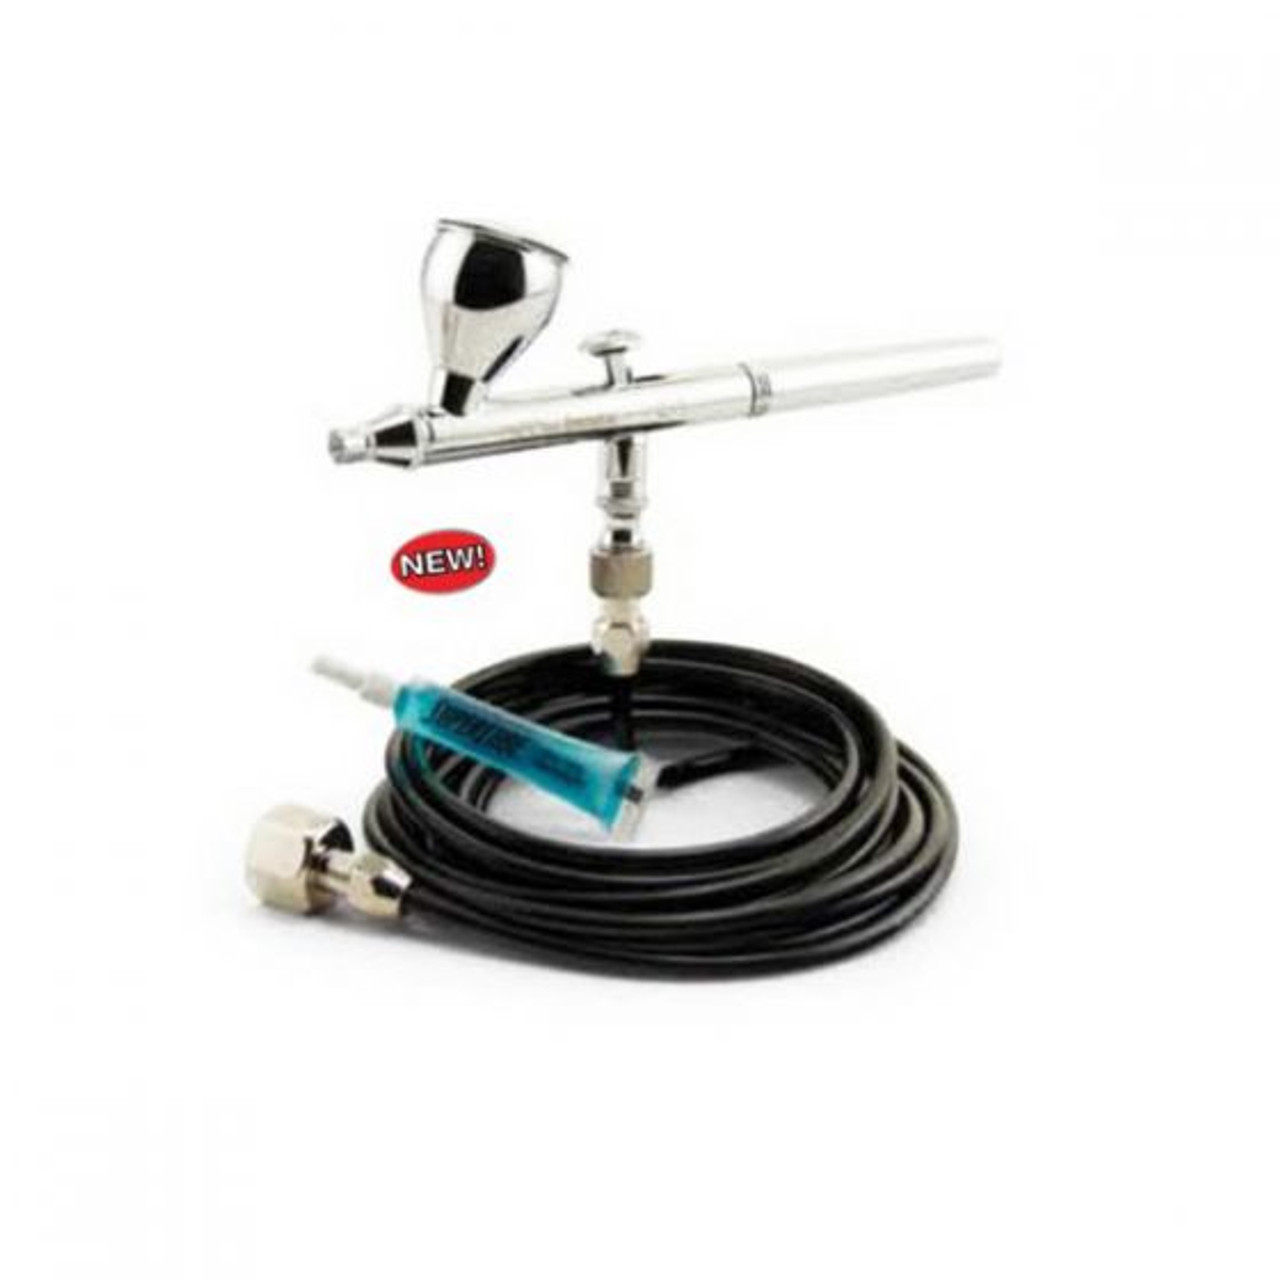 Iwata Neo BCN Siphon Feed airbrush review. 